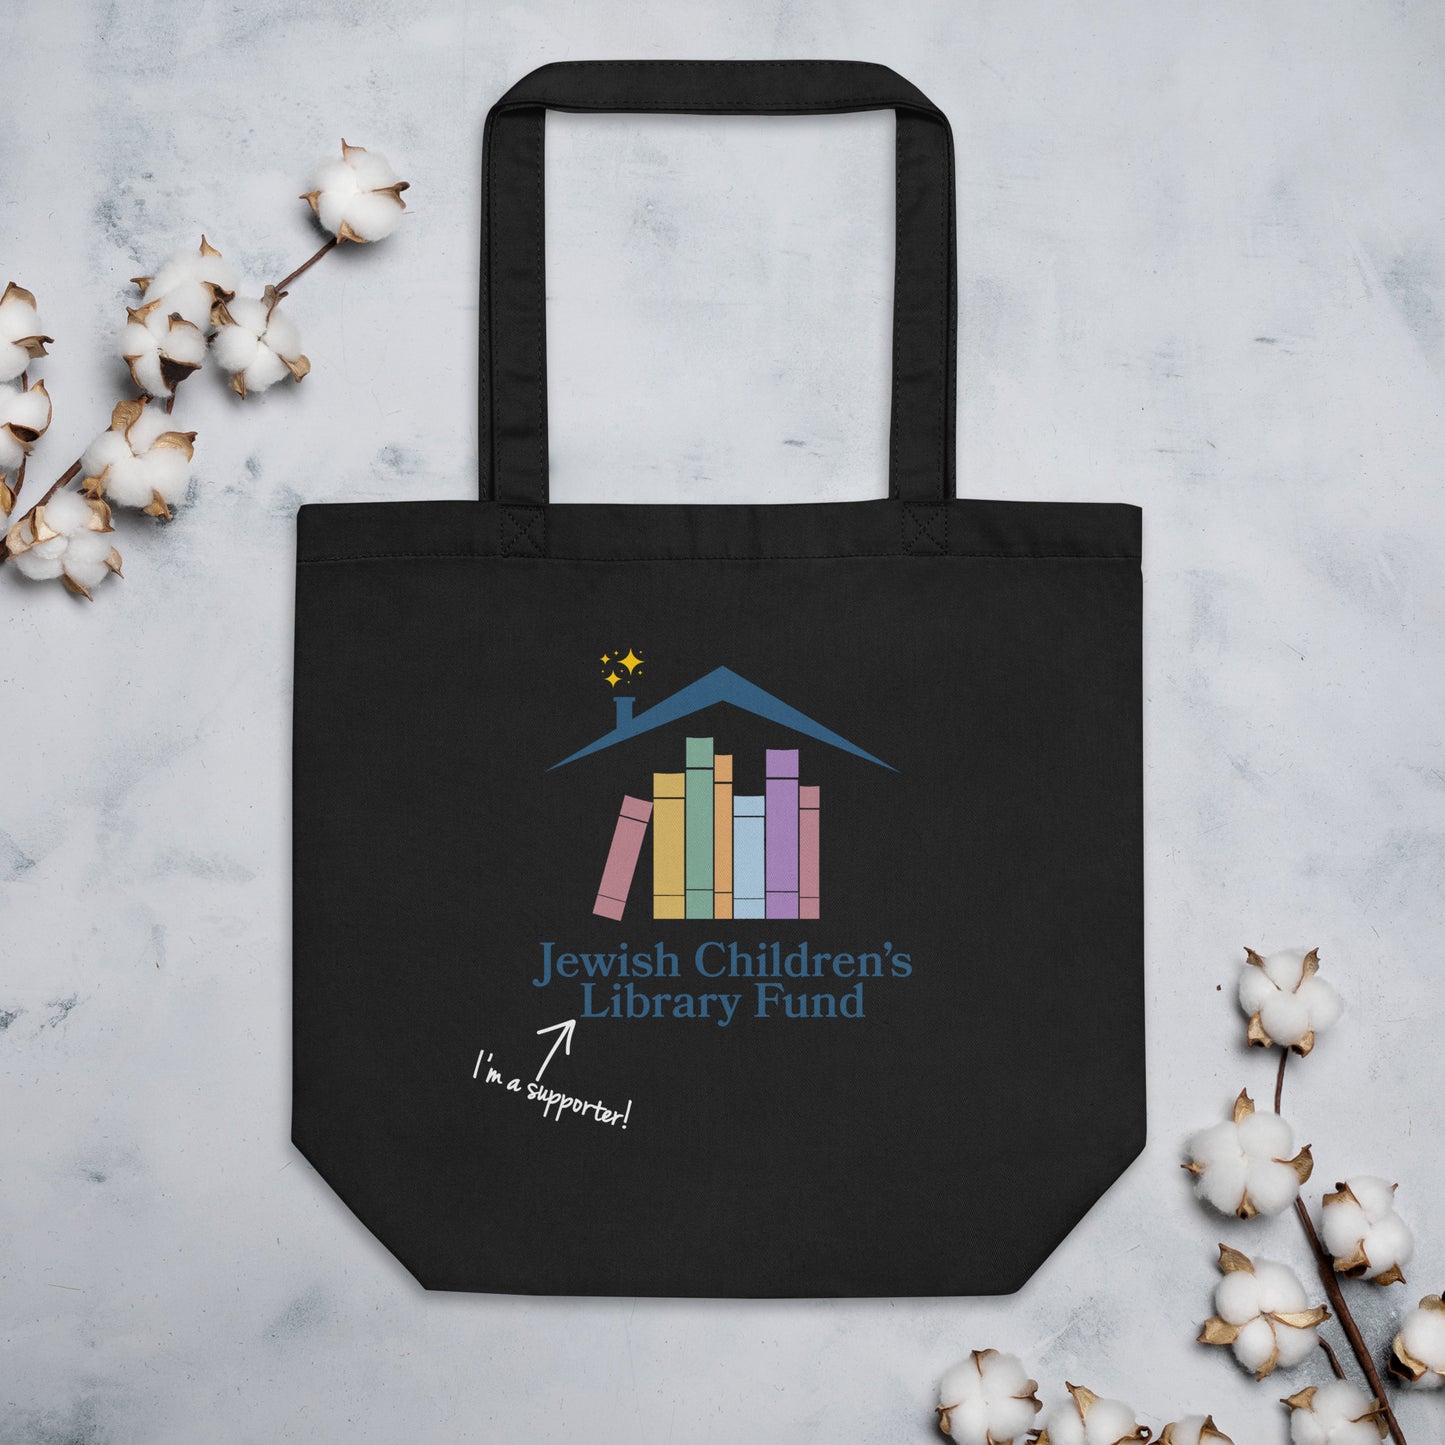 "I'm a supporter" JCLF Tote Bag